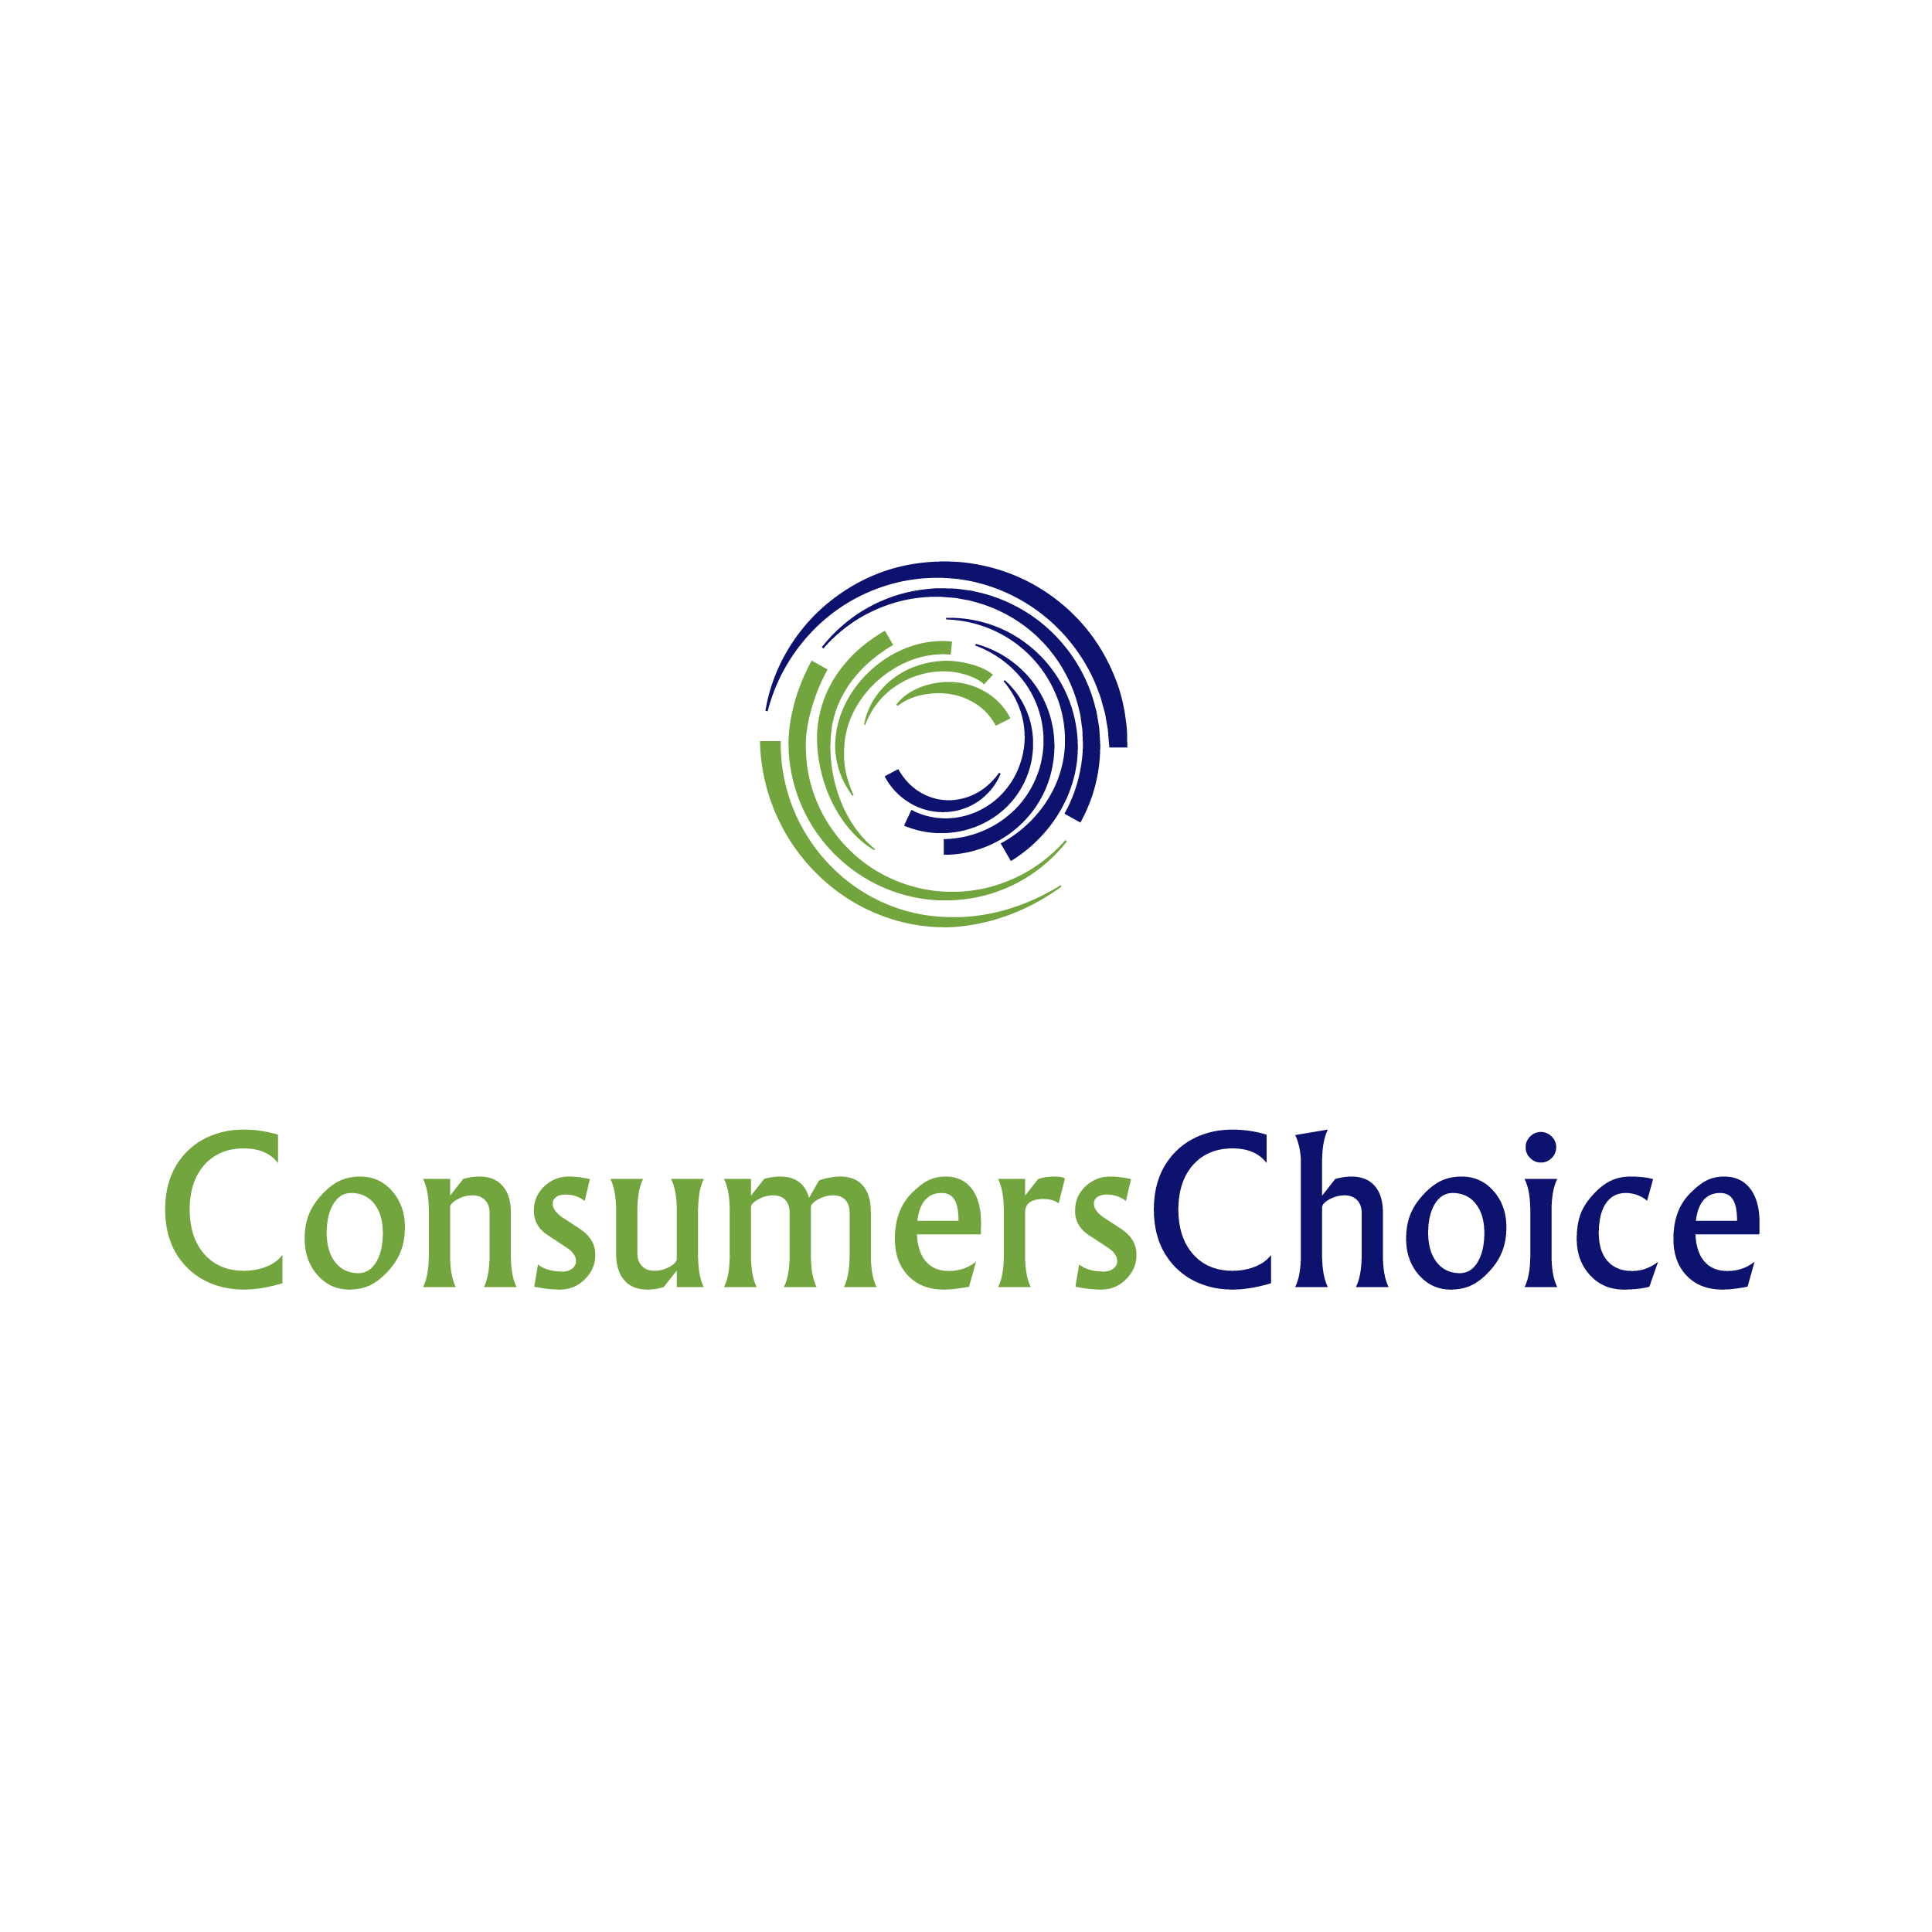 The Consumers Choice 04